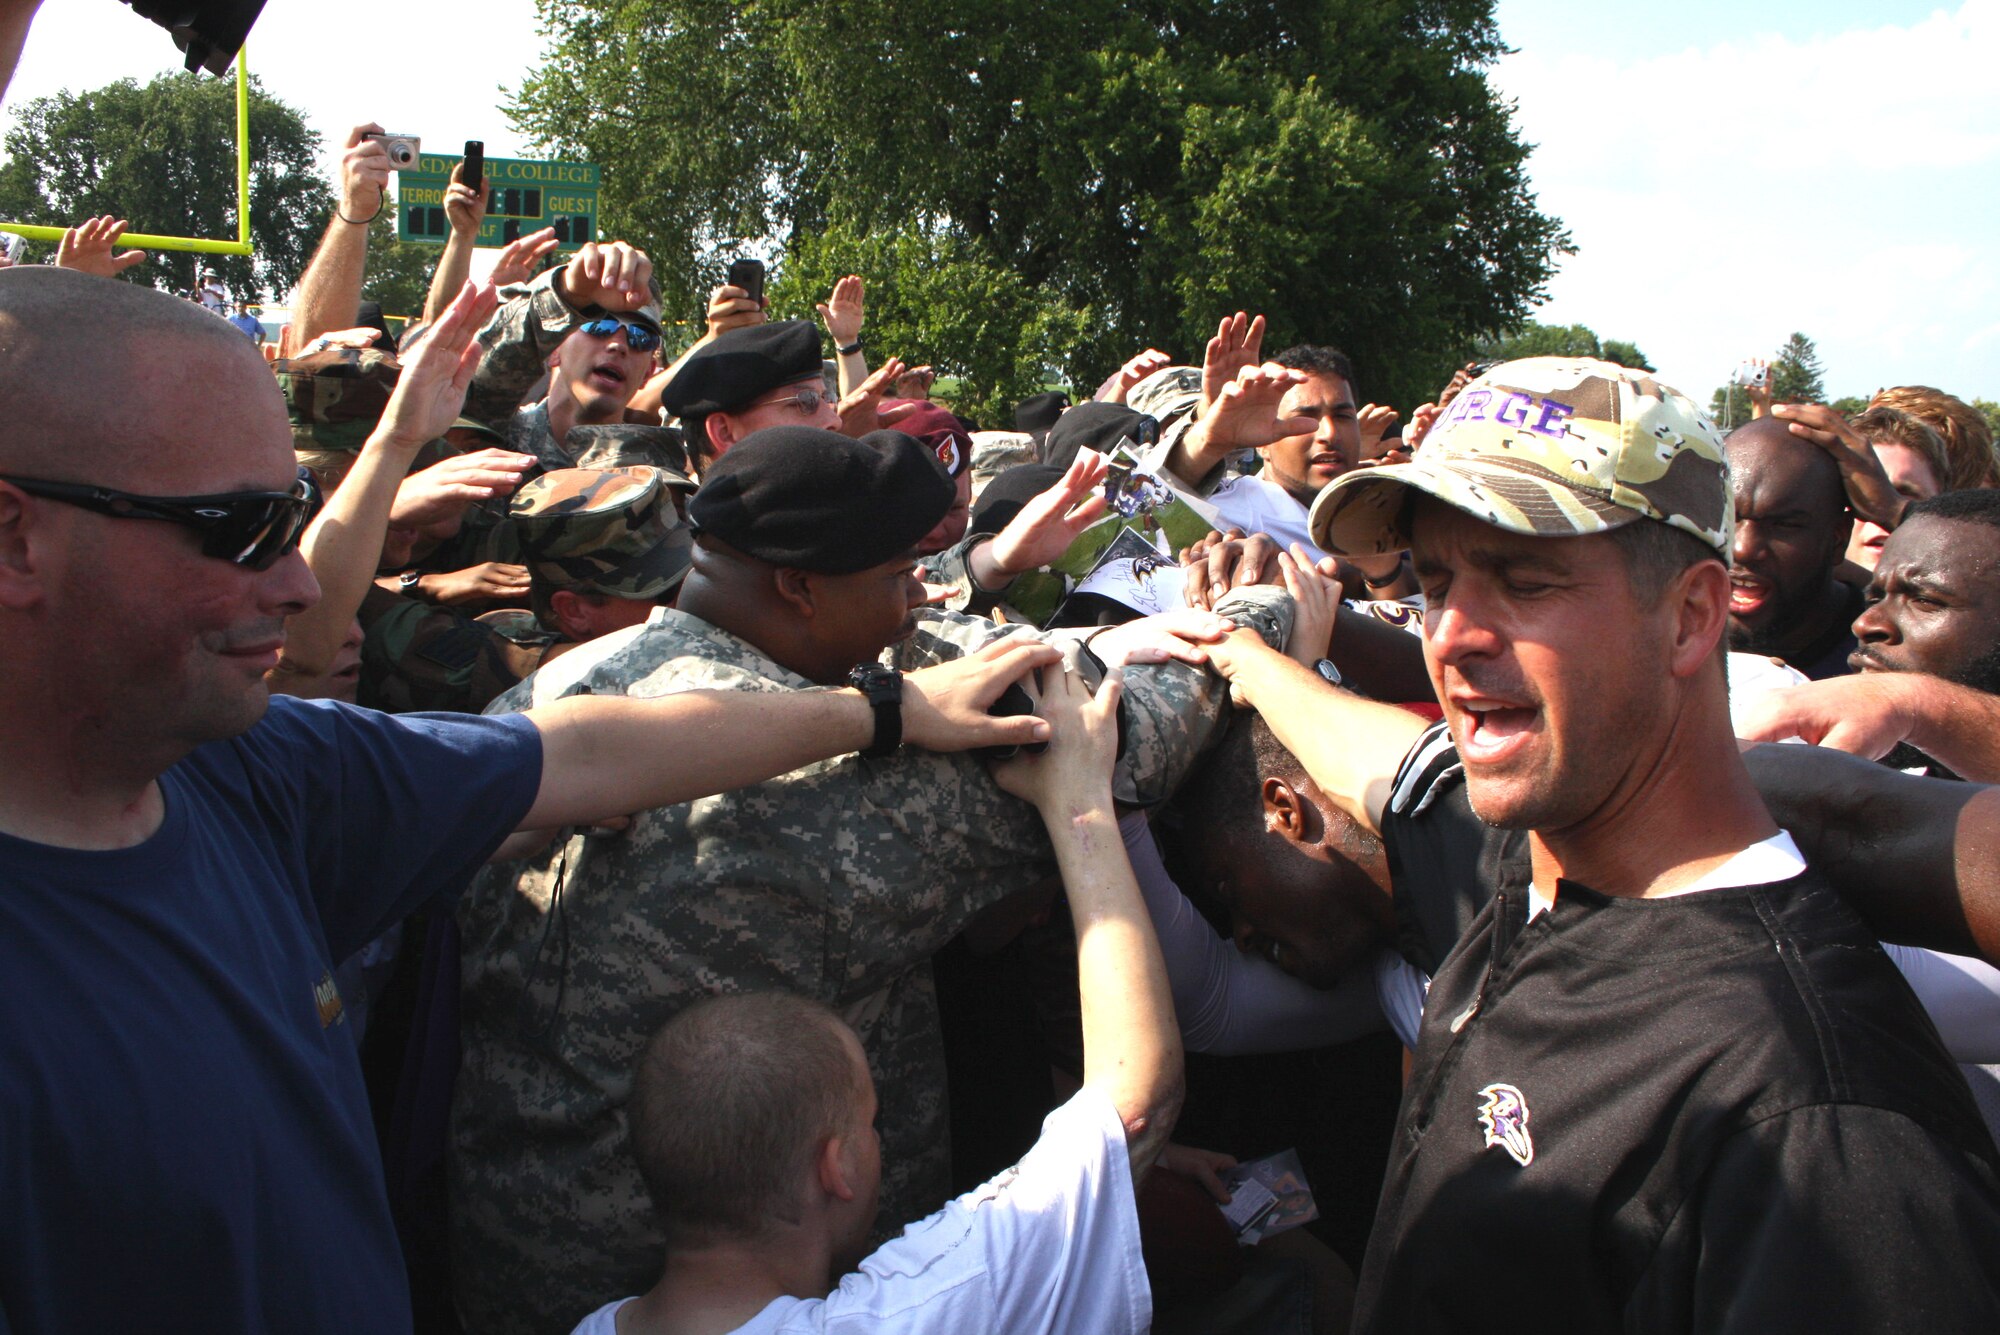 Sharing a warrior spirit, members of the United States military huddled with Baltimore Ravens head coach, John Harbaugh and Ravens football players during the traditional after-practice huddle.  Military members were the guests of the Ravens during a Military Appreciation Day on August 19, 2009. (U.S. Air Force photo by MSgt. Lou DeVeaux, 175th Wing Public Affairs, Warfield Air National Guard Base, Maryland, United States)  
